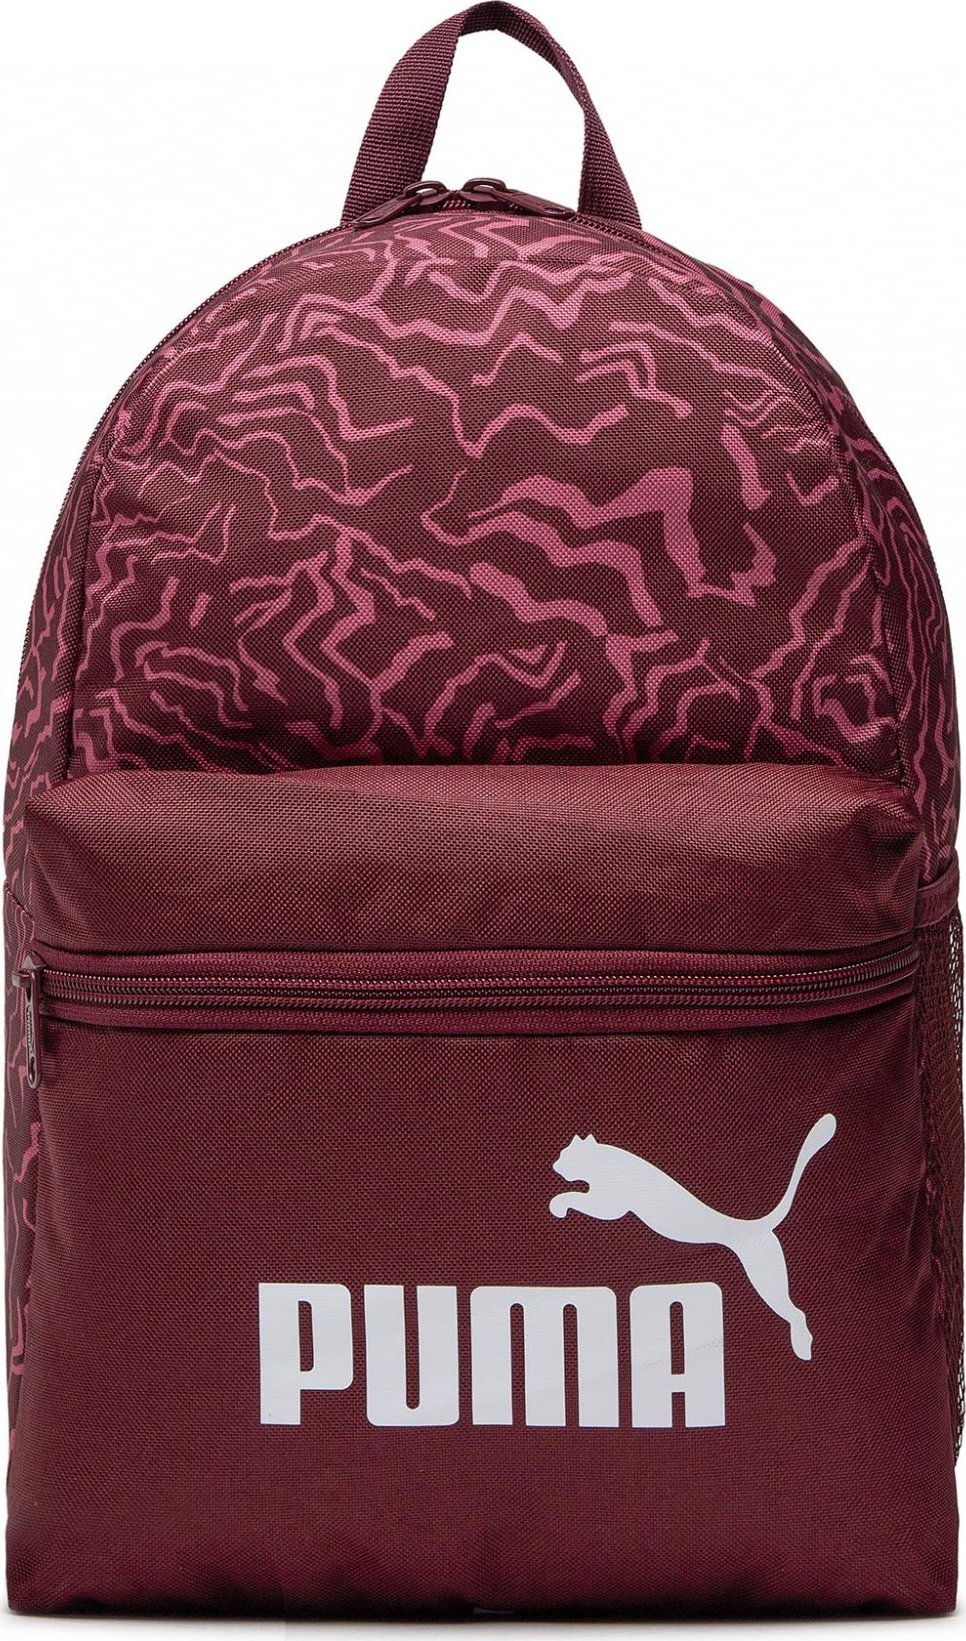 Puma Phase Small Backpack 782370 08